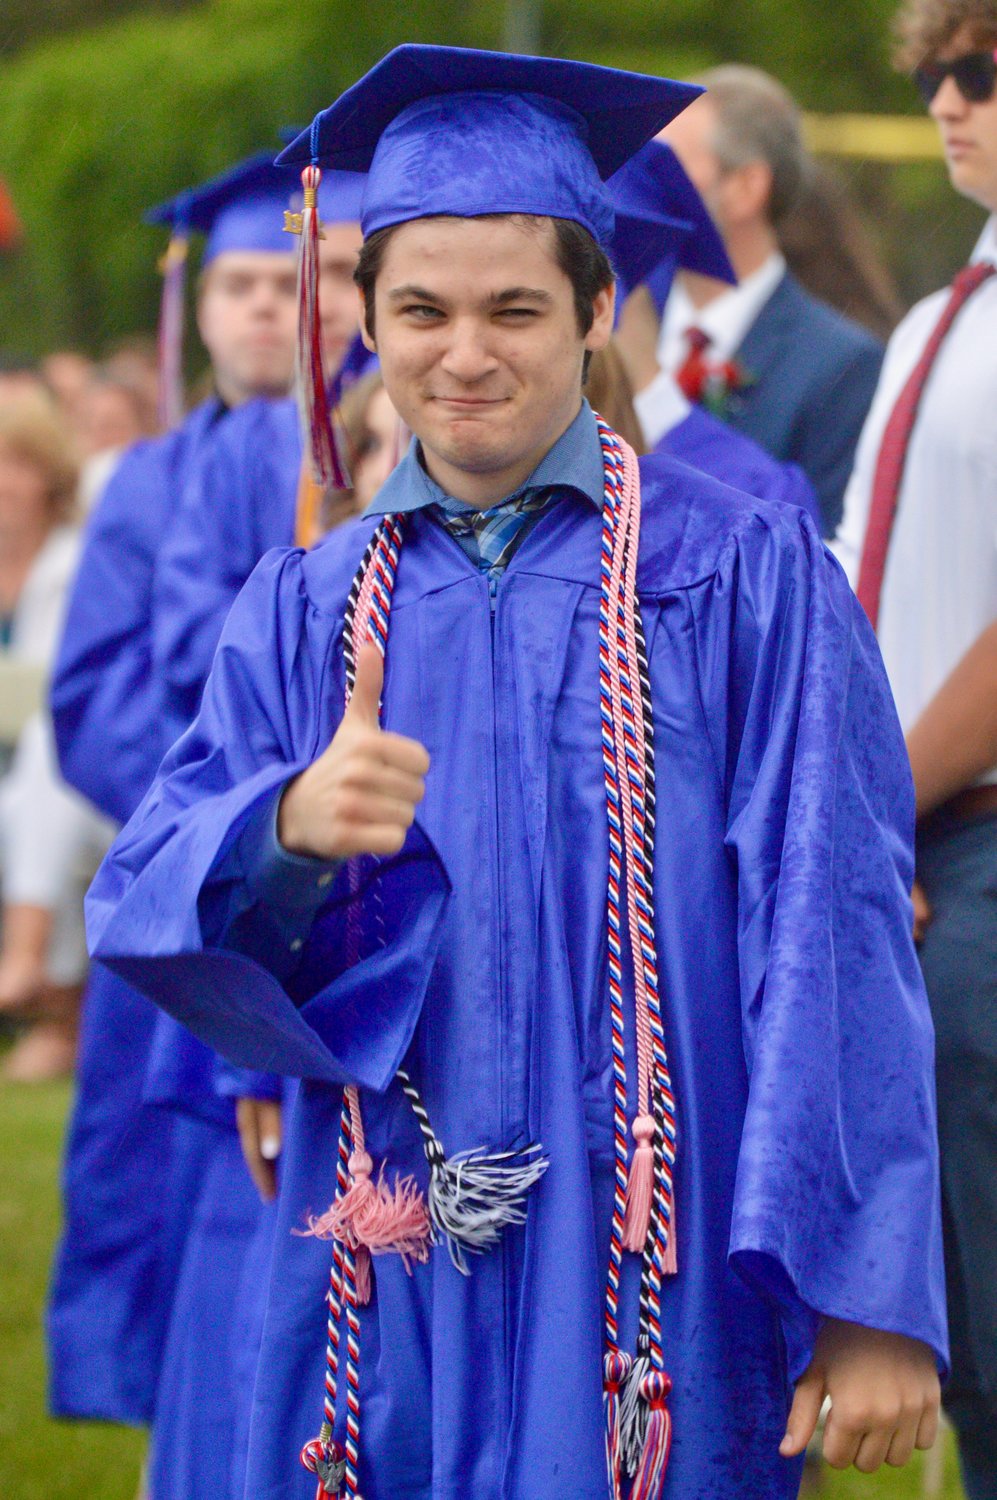 Zachary Rousseau flashes a wink and a thumbs-up before taking the stage to receive his diploma.